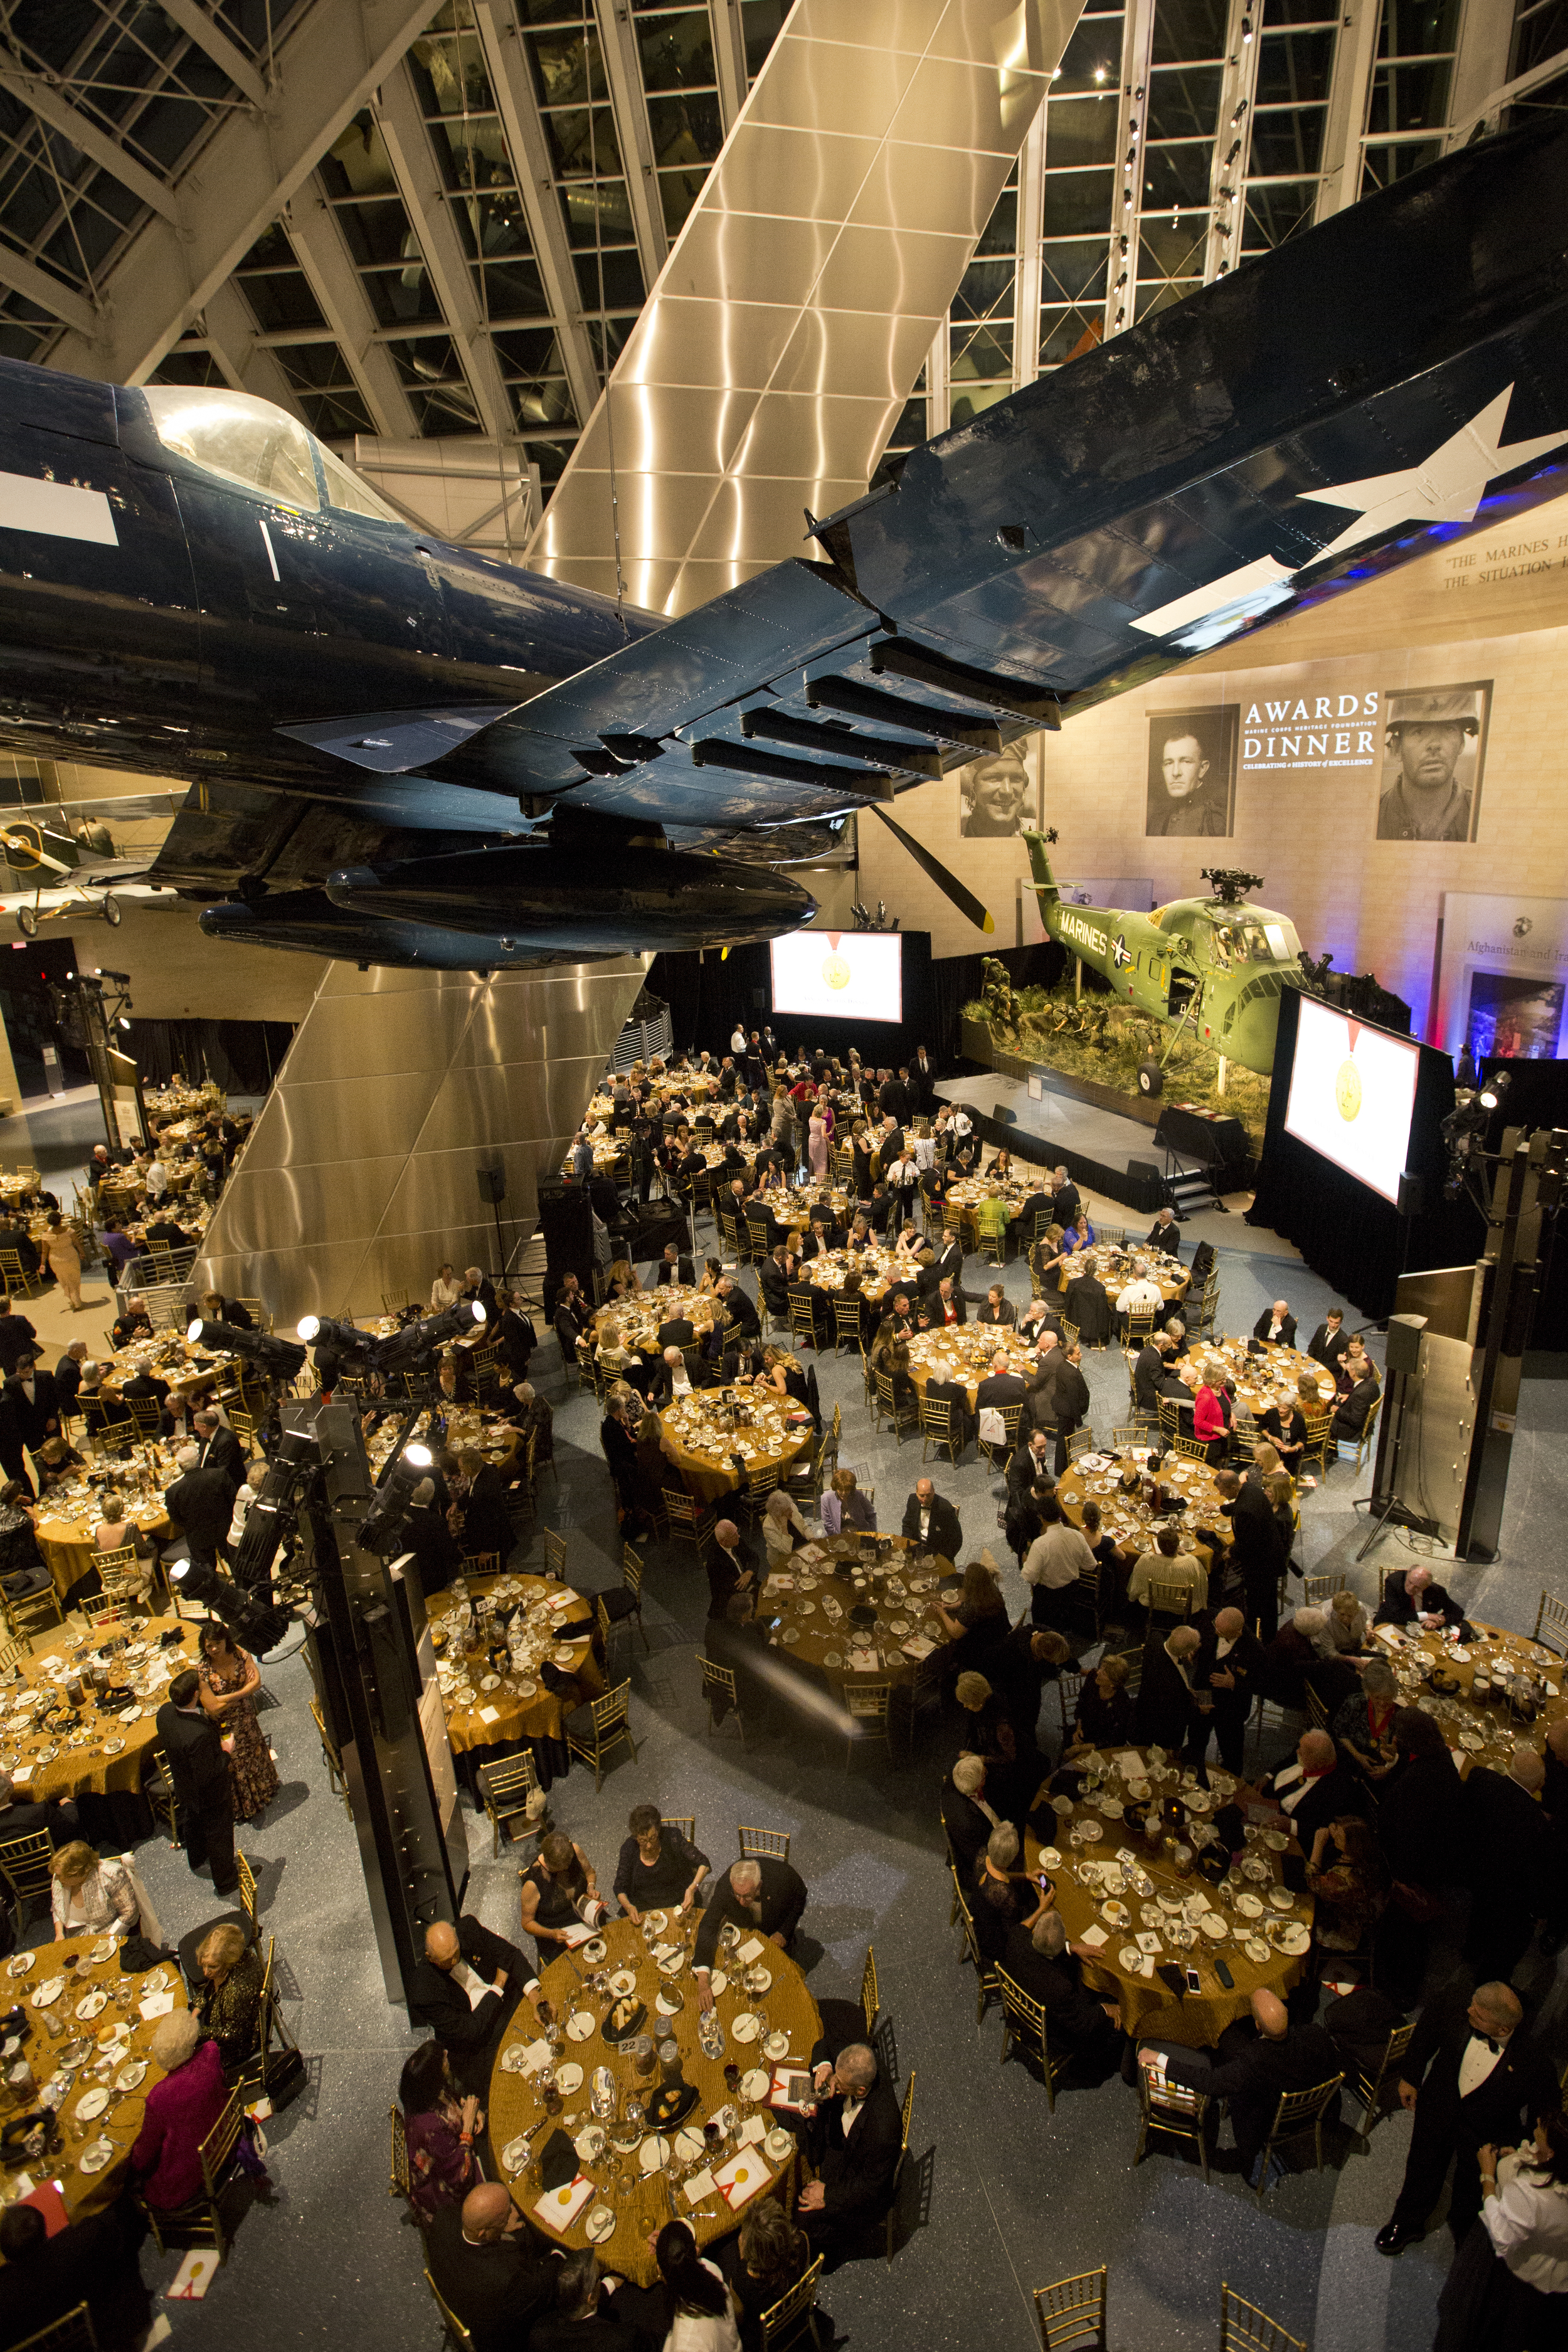  The National Museum of the Marine Corps at the Annual Awards Dinner 